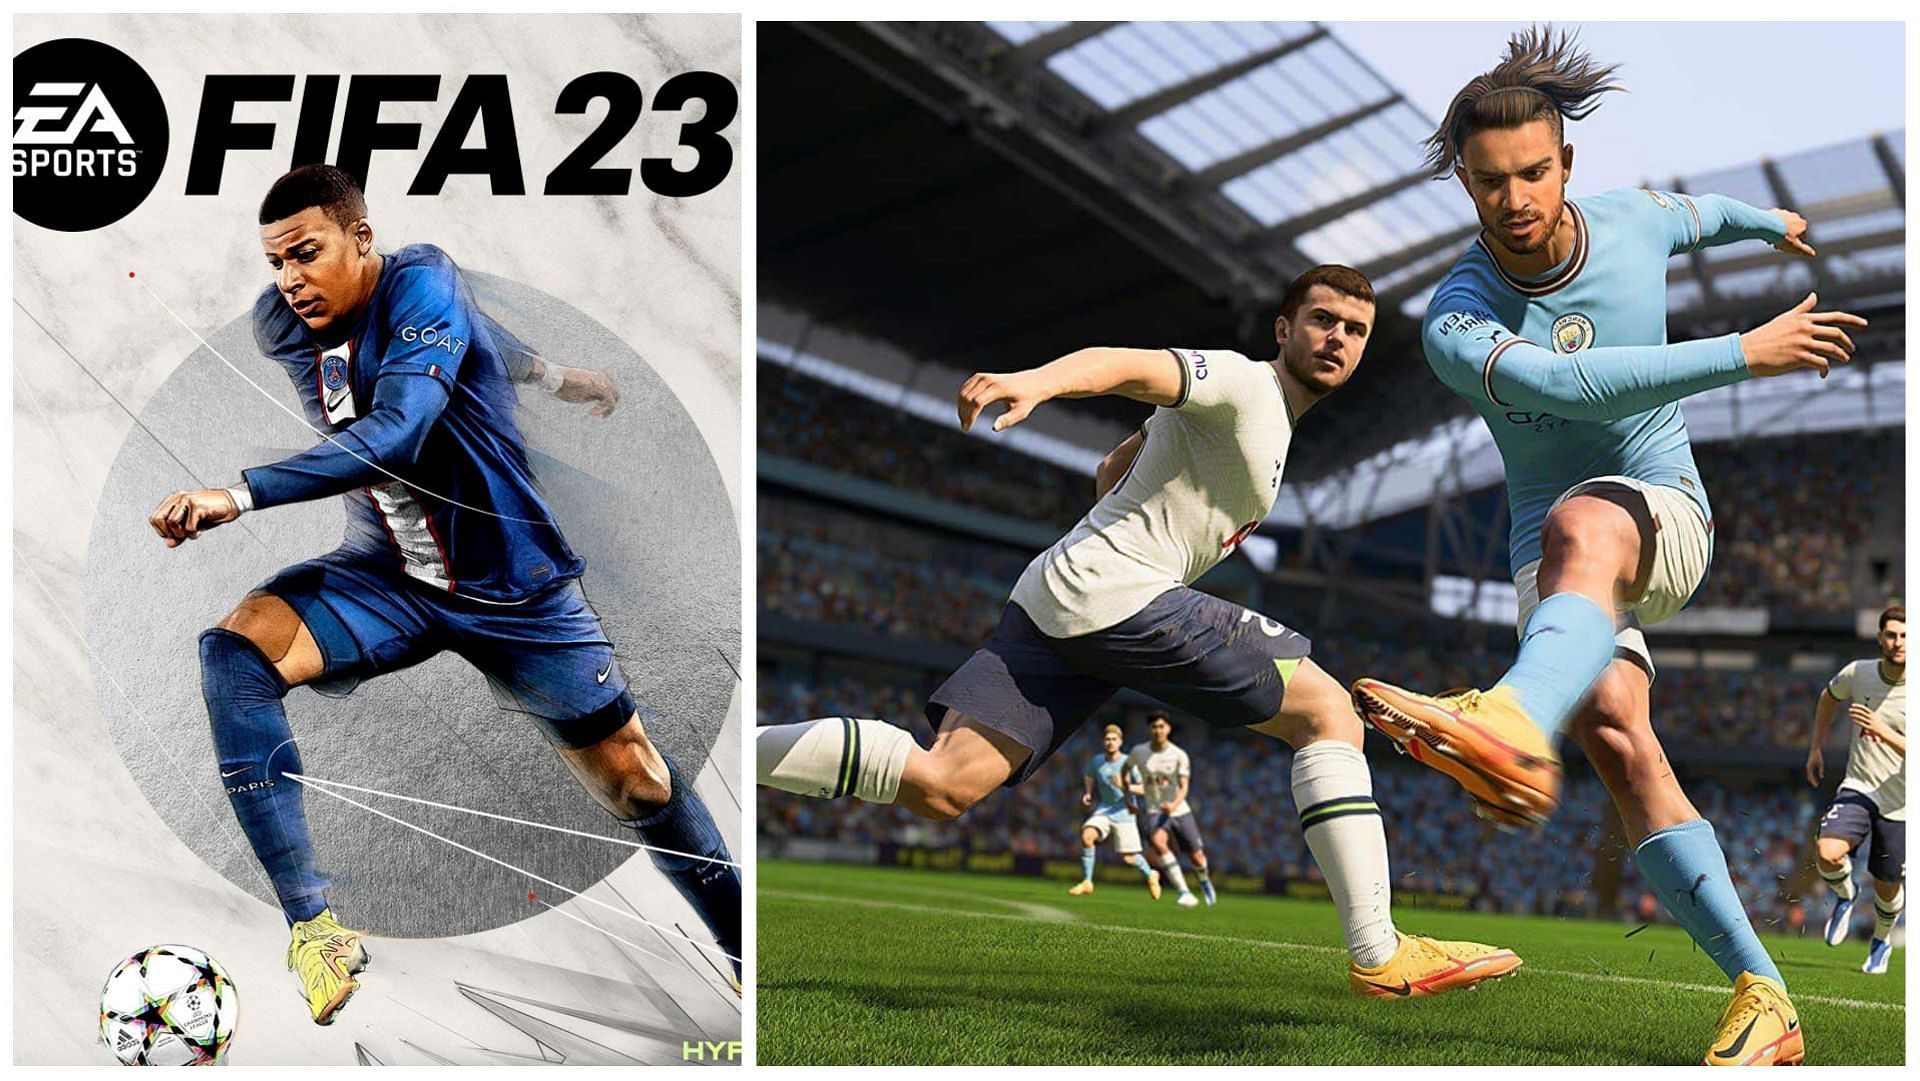 FIFA 23 has been released on early access (Images via EA Sports)